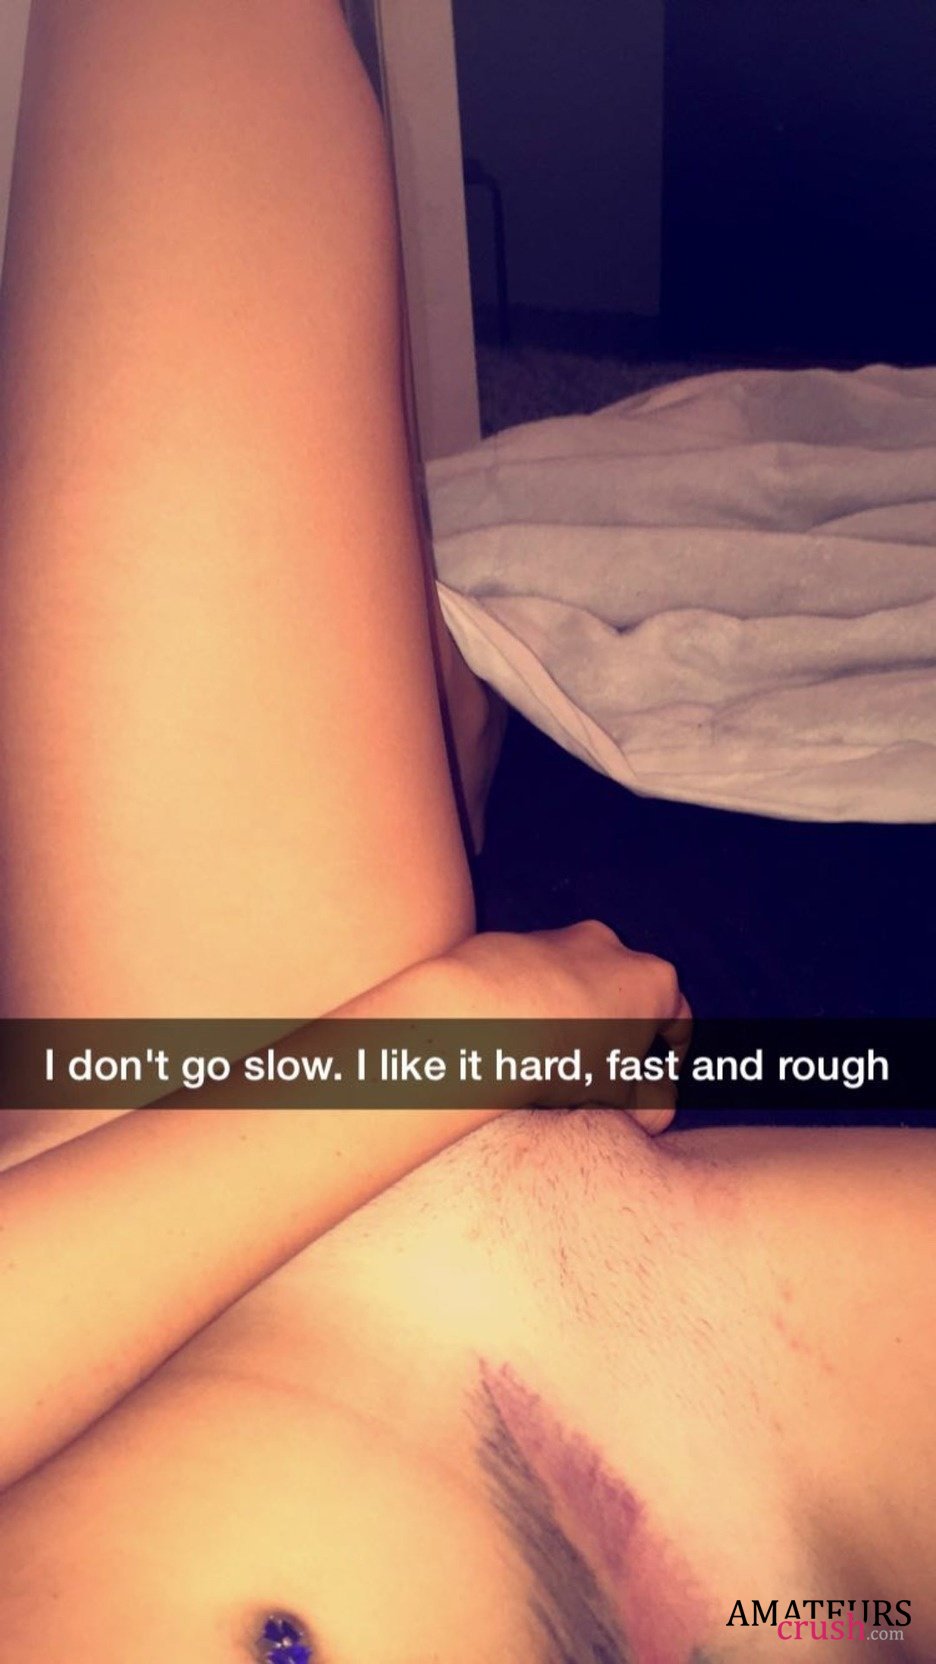 Snapchat Leaked - 36 Naughty Snapchat and Video That Got Hacked